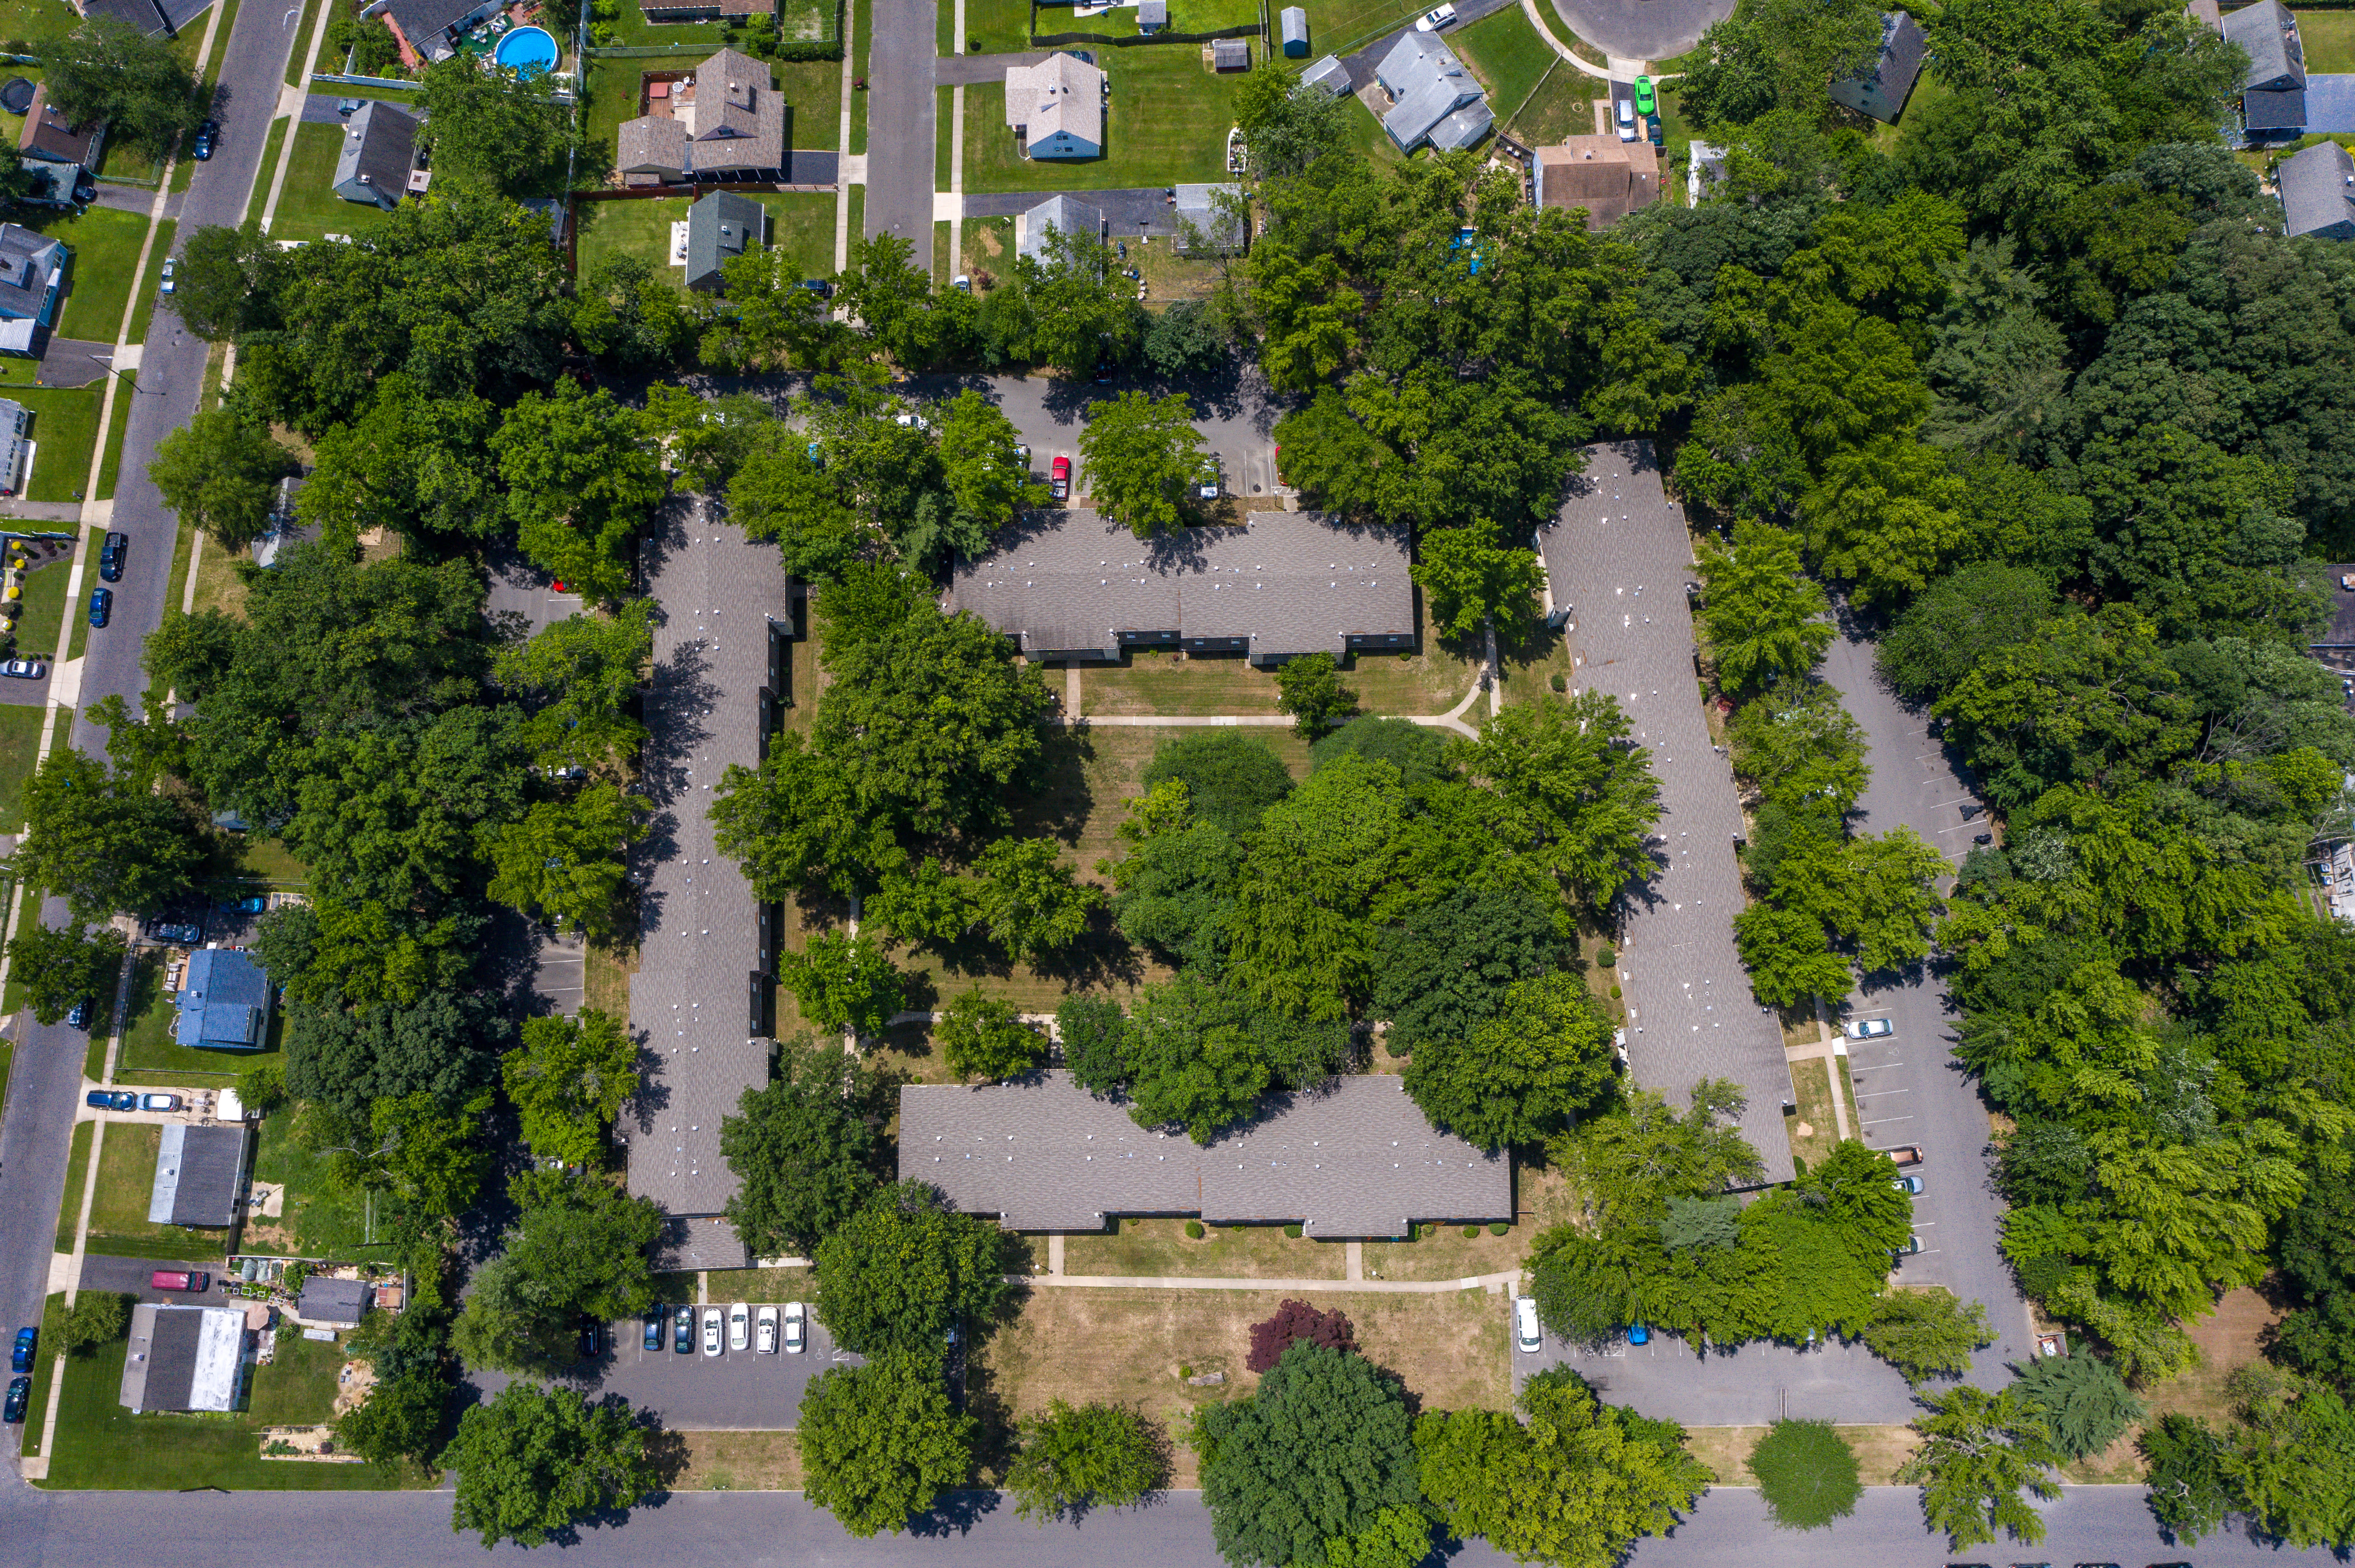 Arial view of the apartments at The Nolan, Morrisville, Pennsylvania